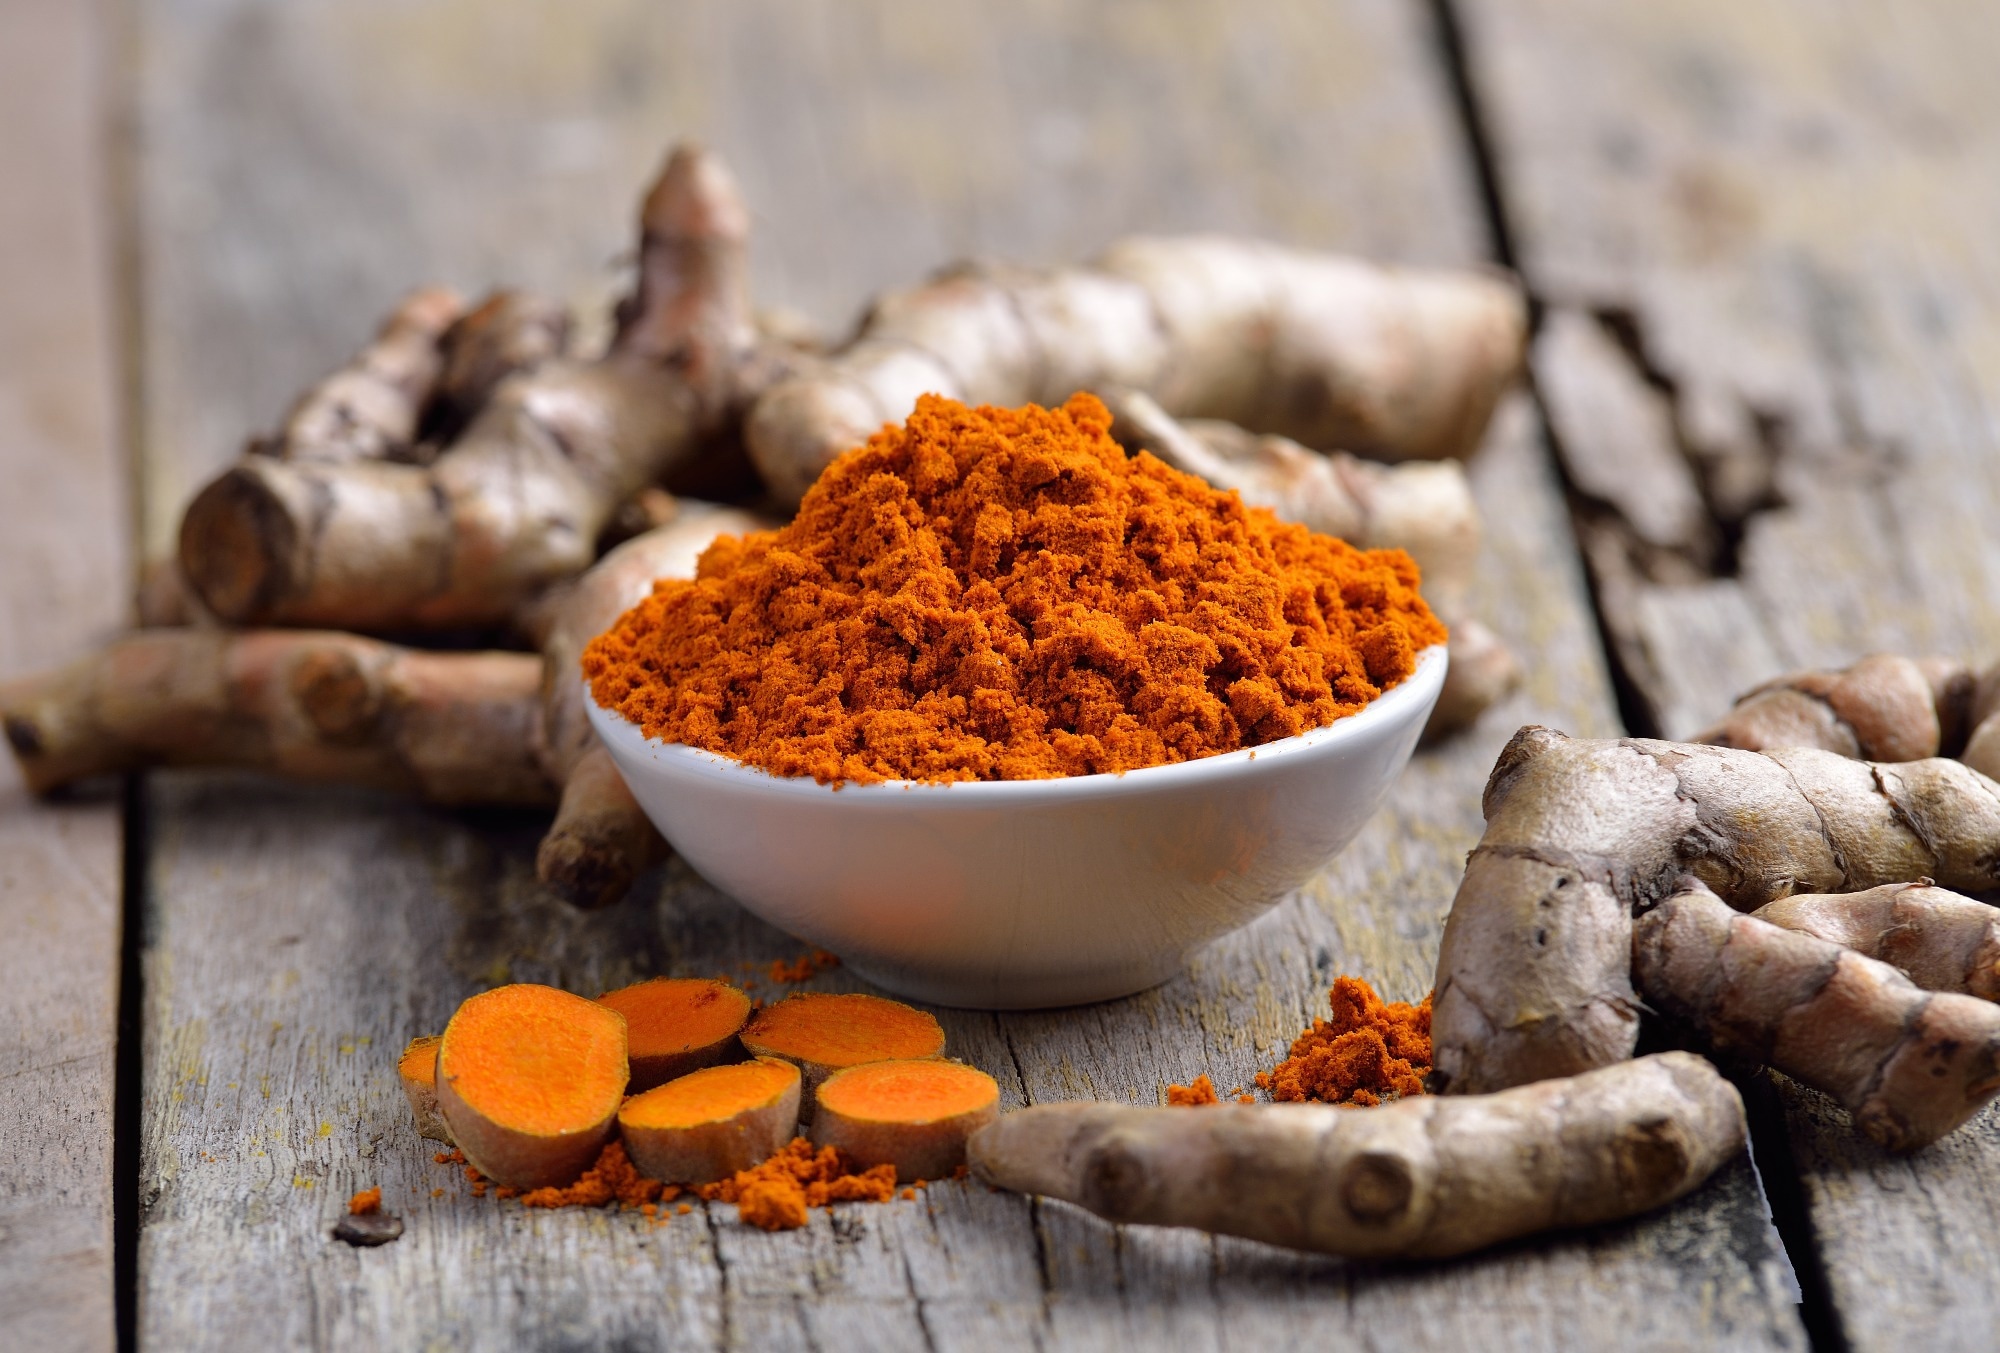 Study: Effects of turmeric (Curcuma longa) supplementation on glucose metabolism in diabetes mellitus and metabolic syndrome: An umbrella review and updated meta-analysis. Image Credit: SOMMAI/Shutterstock.com